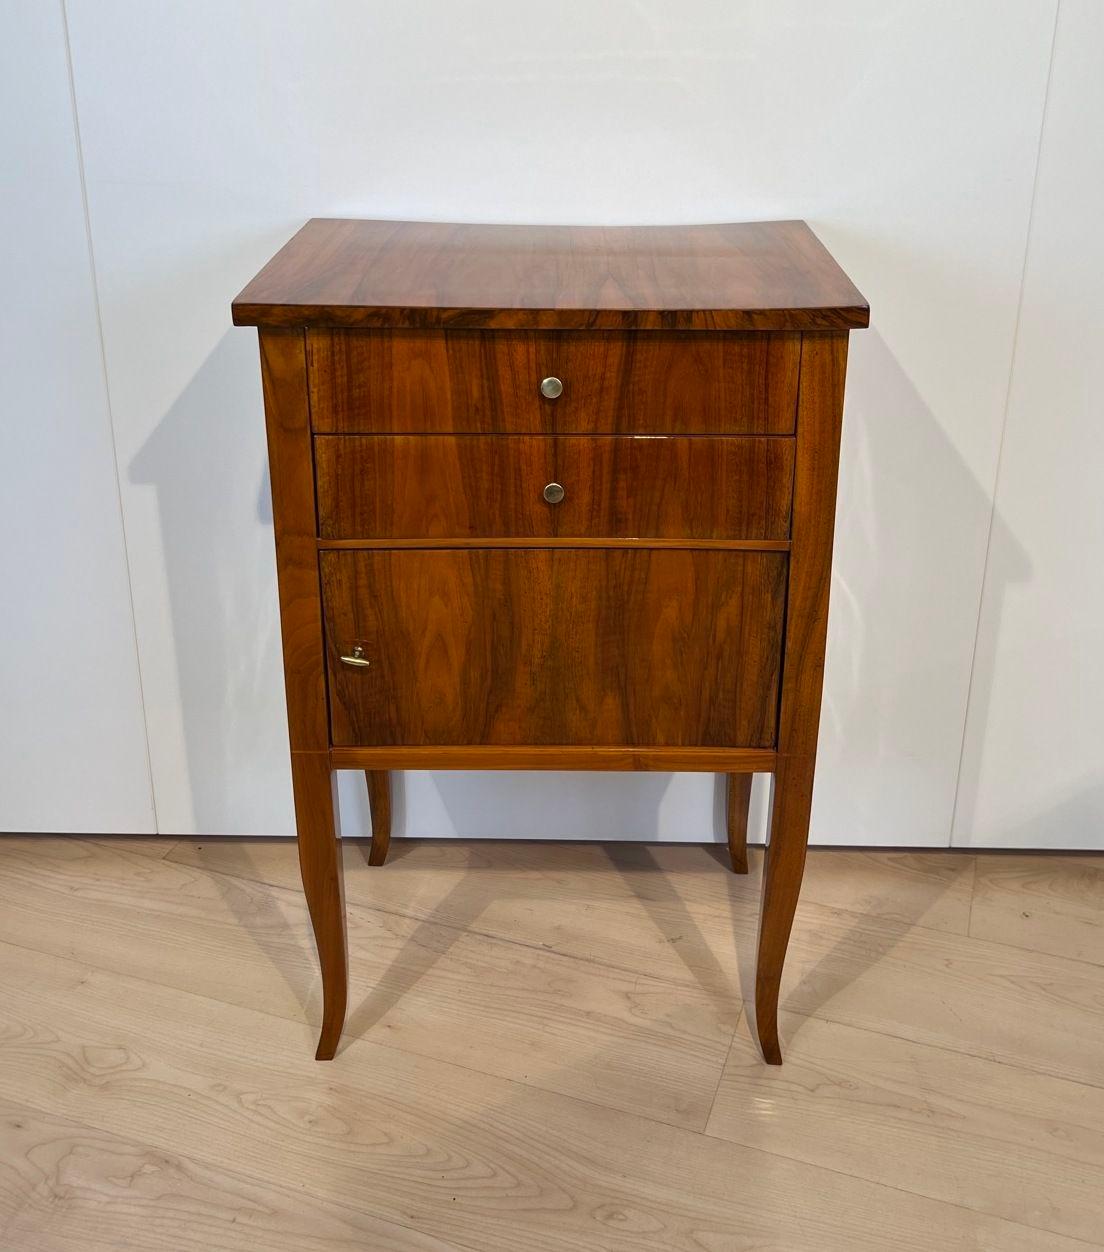 Biedermeier nightstand or small half cabinet from south Germany around 1825.
Walnut veneered and solid. Restored and hand polished with shellac.
Two drawers, one door, brass buttons, maple intarsia ribbon.
Dimensions:
* H 82 cm x W 52 cm x D 37 cm
*